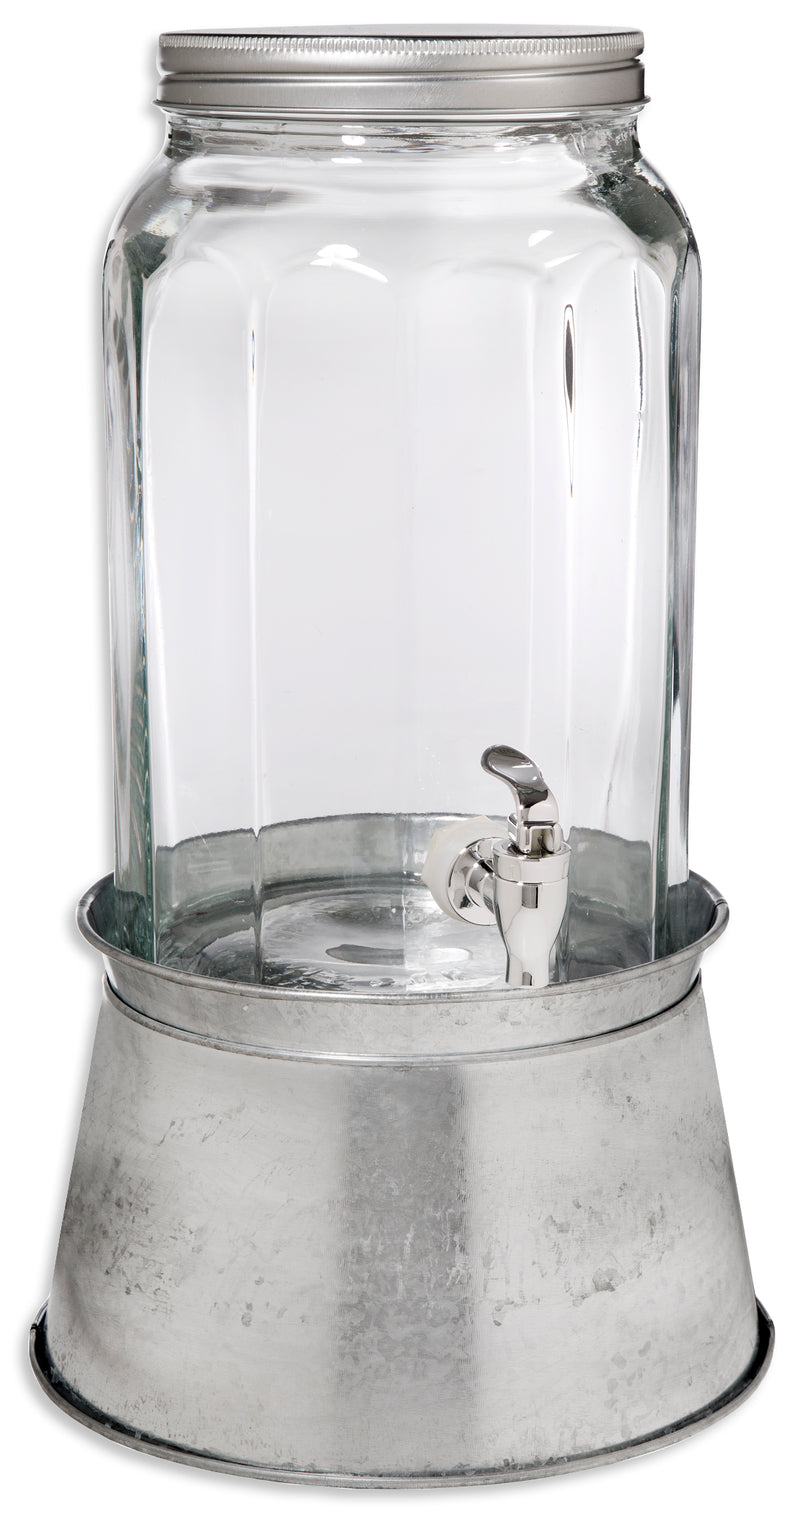 COUNTRY CHIC PANELED 1.5 GALLON DISPENSER ON GALVANIZED BASE